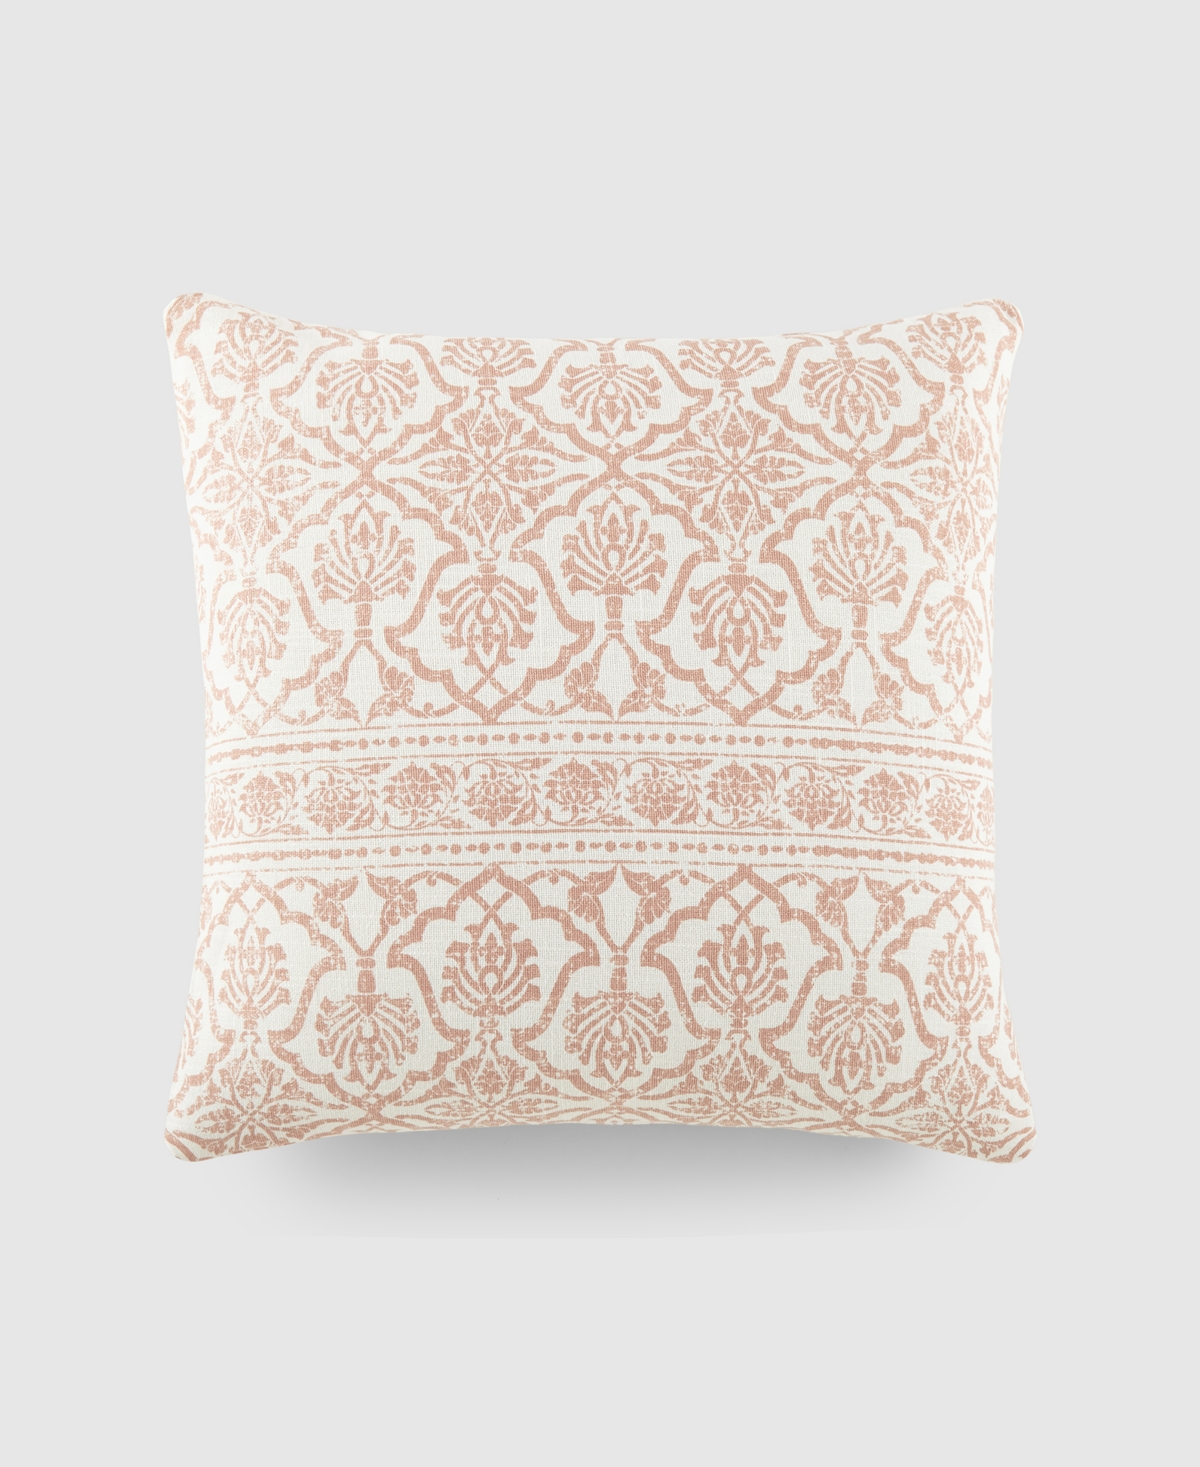 Ienjoy Home Damask Printed Decorative Pillow, 20" X 20" In Light Pink Damask